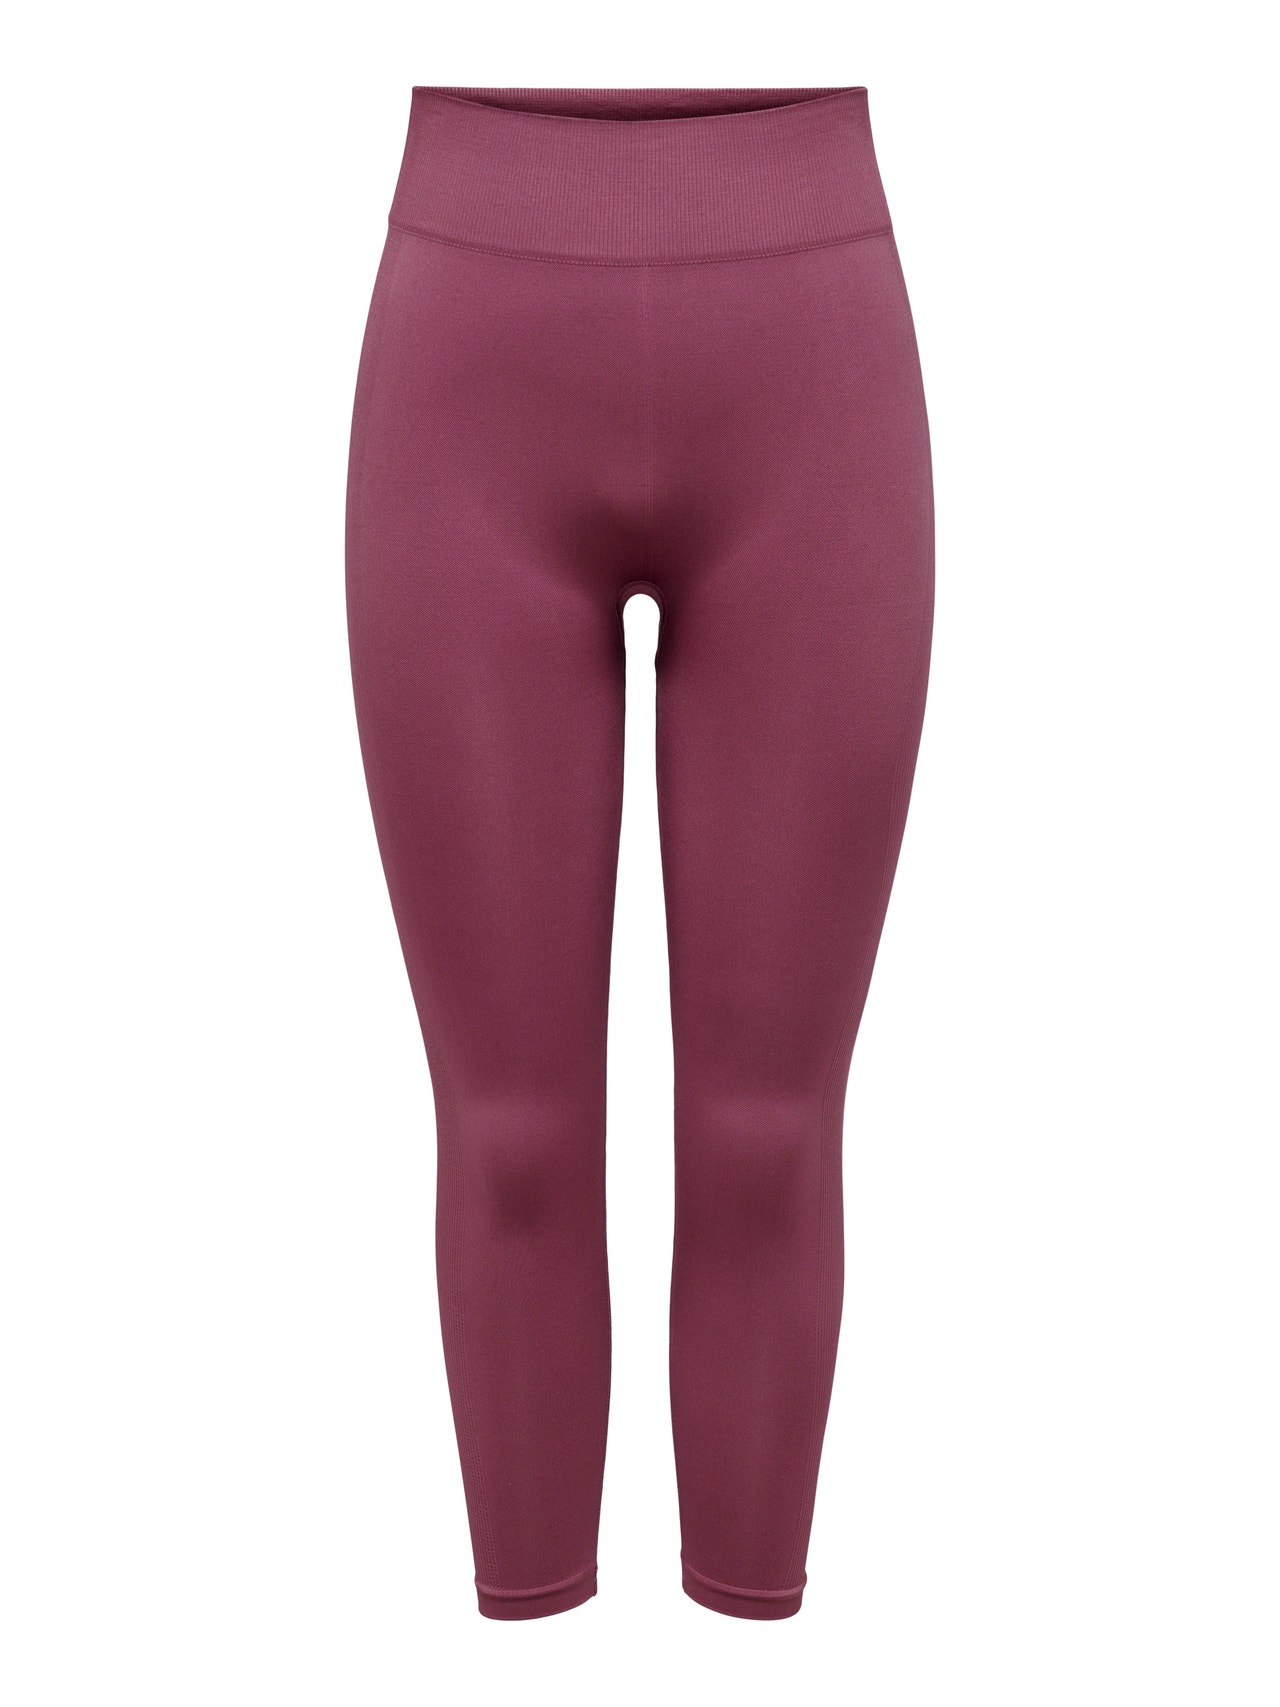 Tight Fit High waist Leggings with 30 discount!